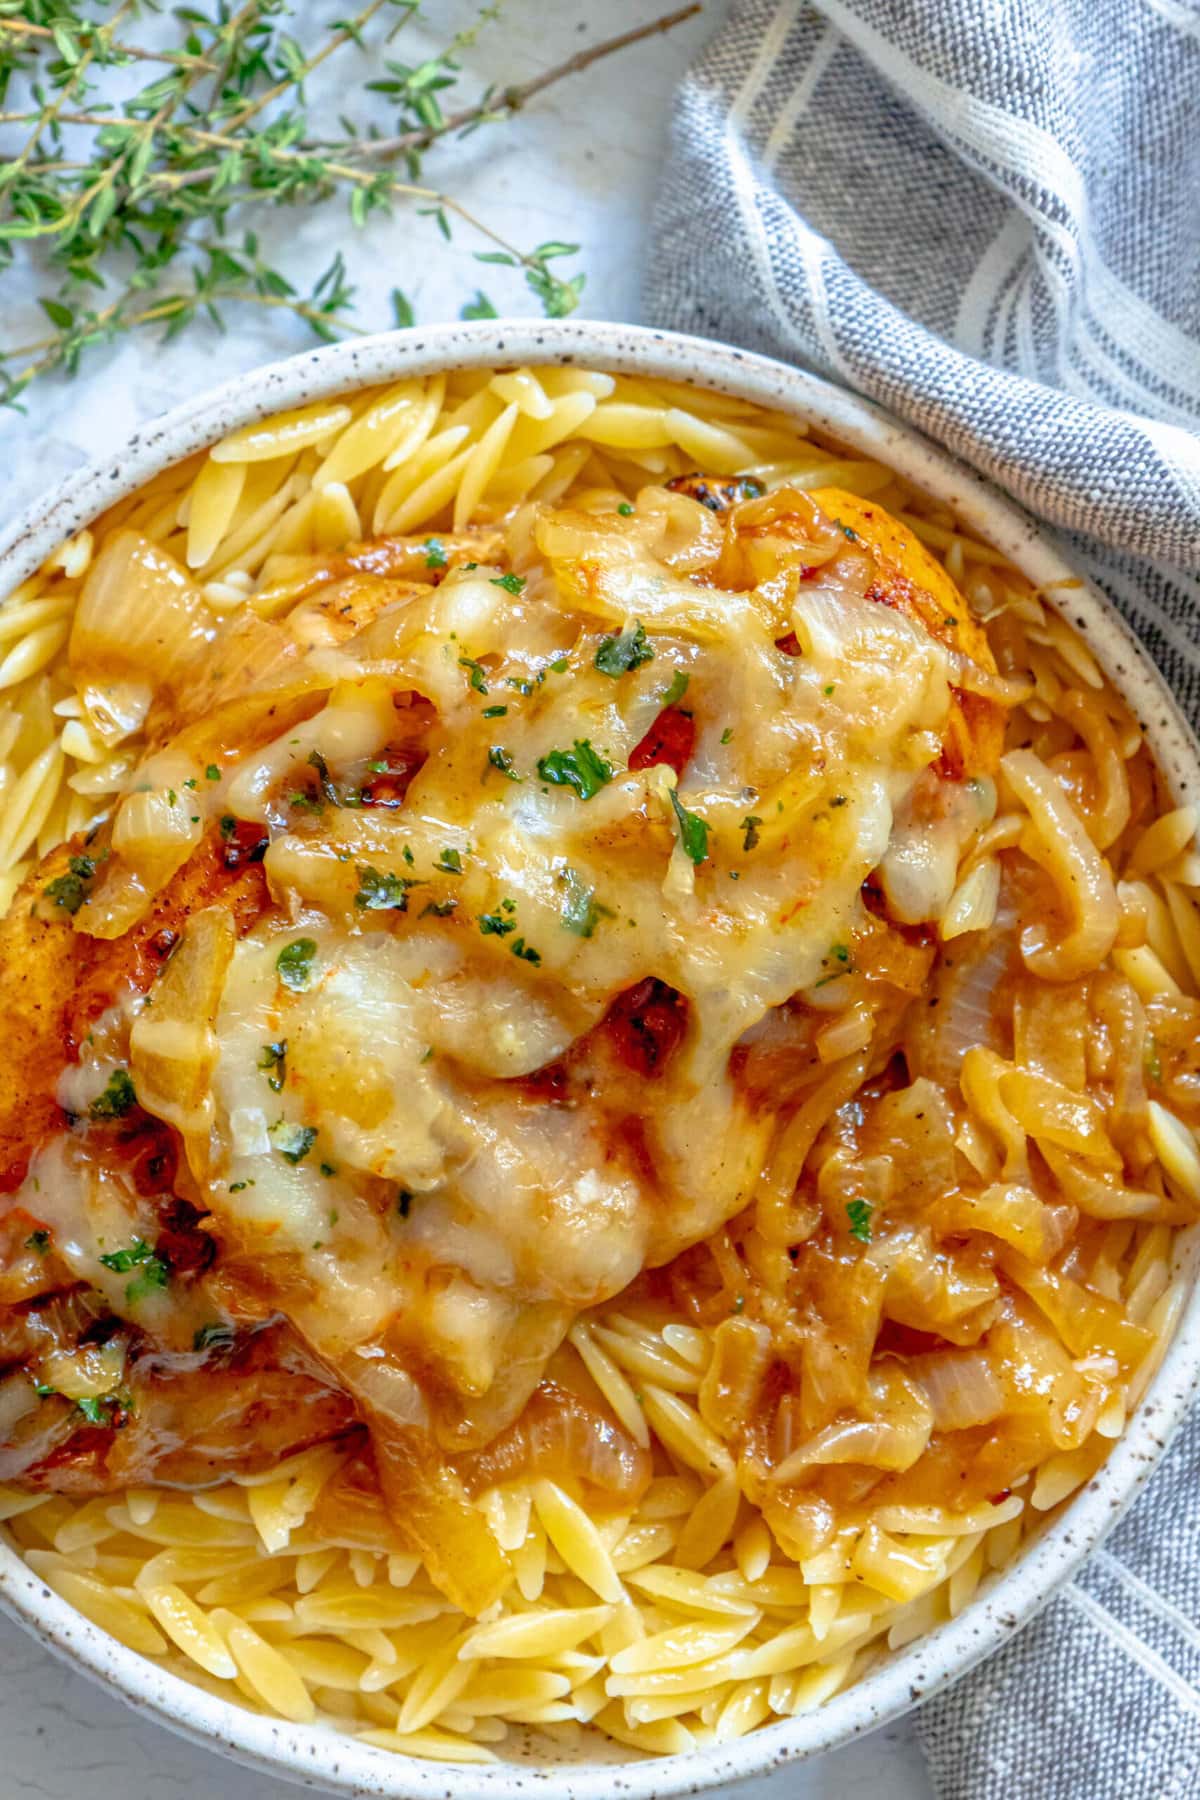 chicken breast with melted cheese and french onions